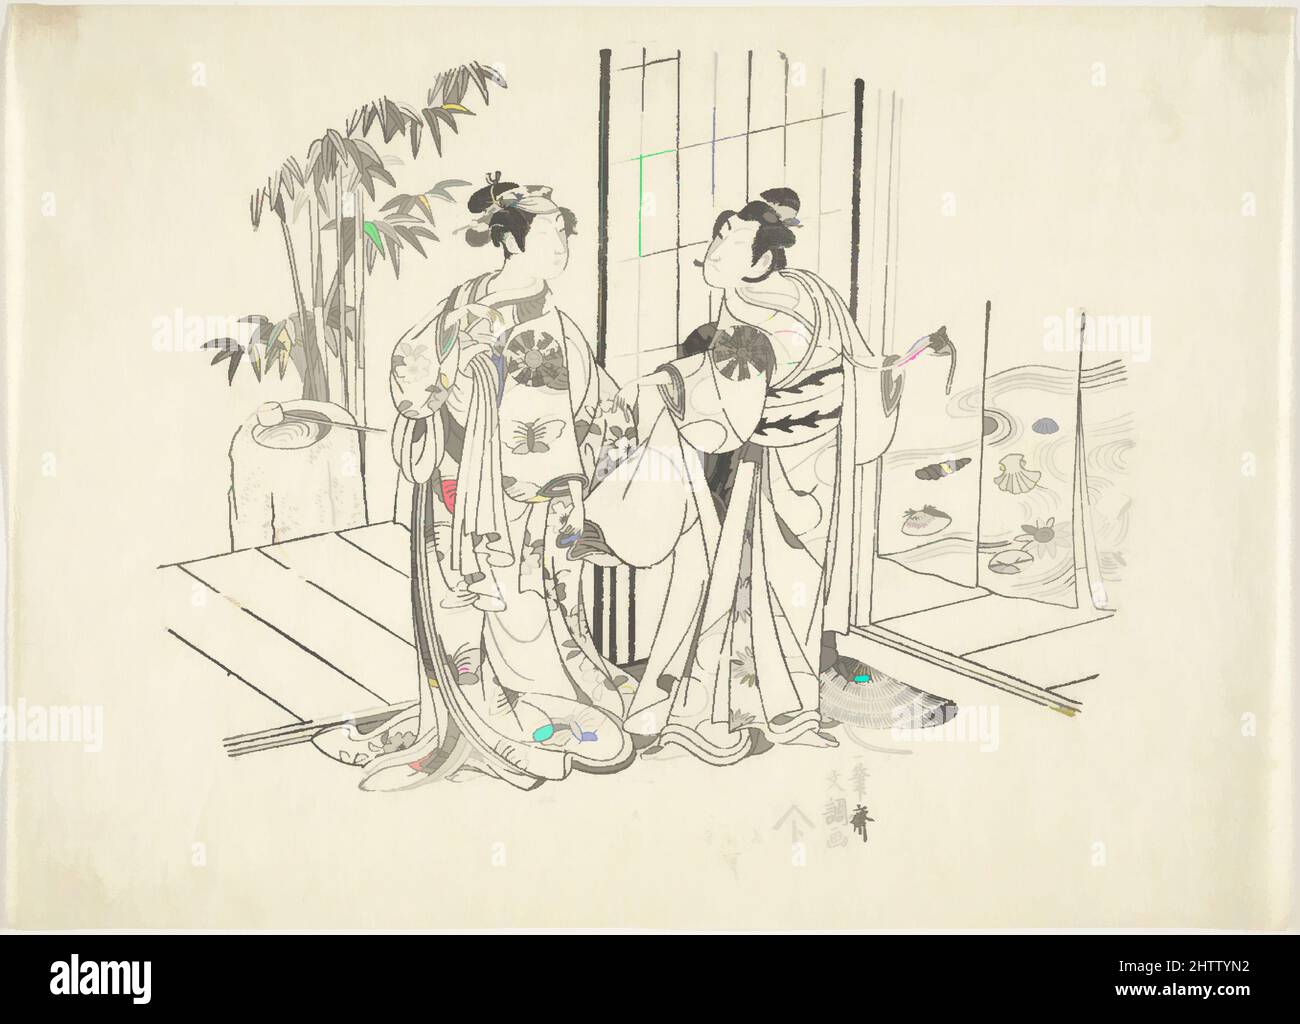 Art inspired by The Actors, Edo period (1615–1868), Japan, Monochrome woodblock print; ink on paper, H. 9 3/4 in. (24.8 cm); W. 13 1/2 in. (34.3 cm), Prints, Ippitsusai Bunchō (Japanese, active 1760–1794, Classic works modernized by Artotop with a splash of modernity. Shapes, color and value, eye-catching visual impact on art. Emotions through freedom of artworks in a contemporary way. A timeless message pursuing a wildly creative new direction. Artists turning to the digital medium and creating the Artotop NFT Stock Photo